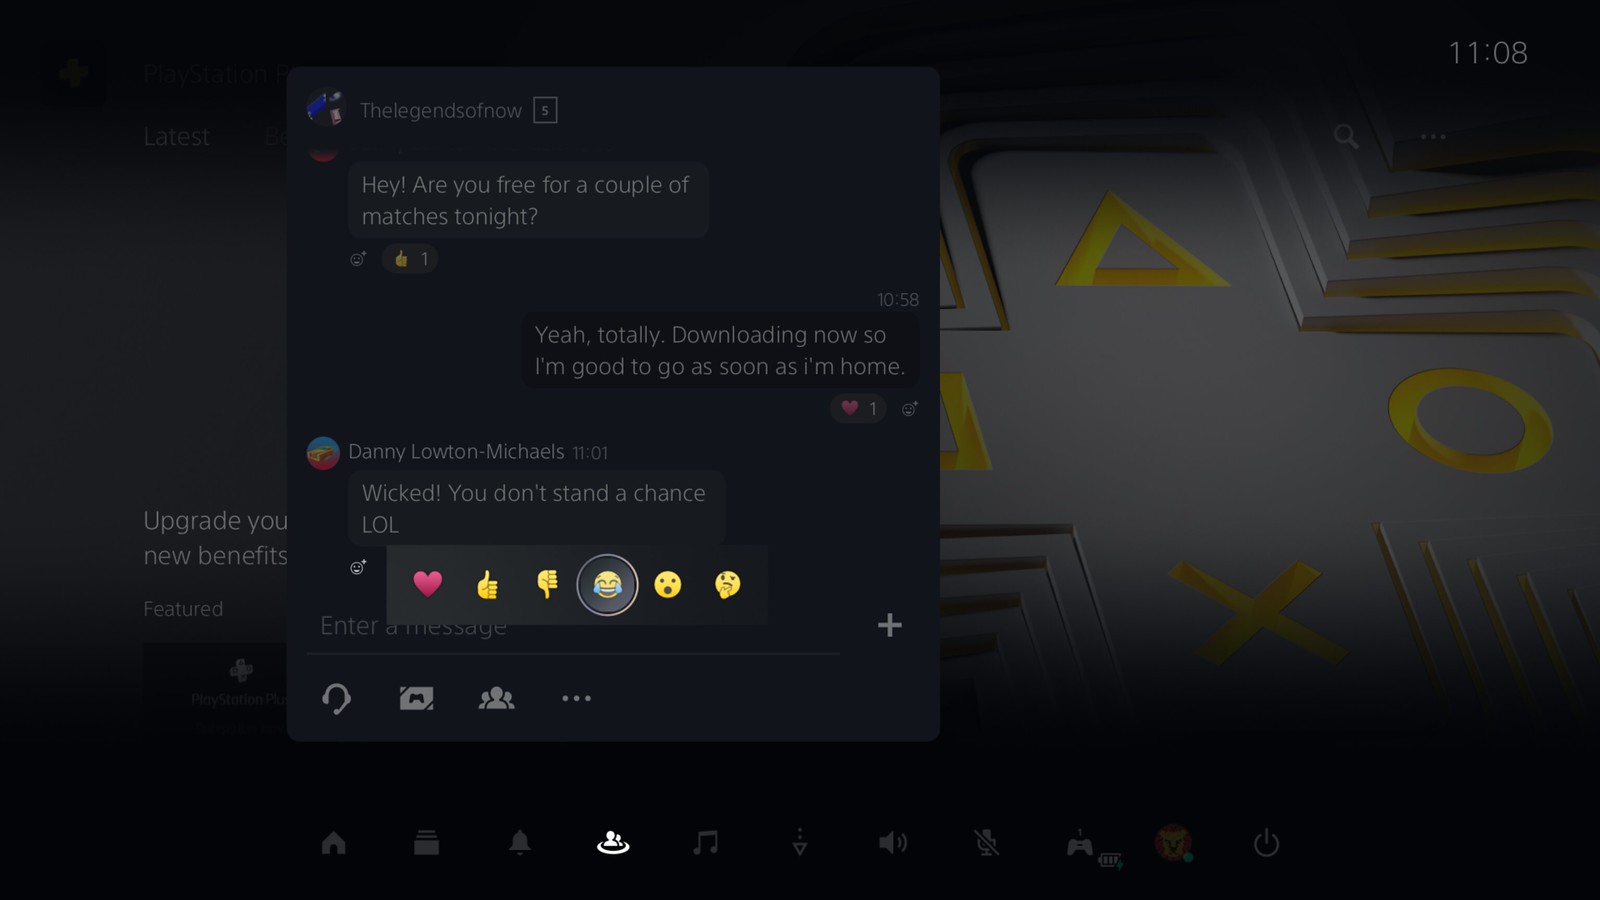 PS5 UI screen showing the option to react to messages with emojis.